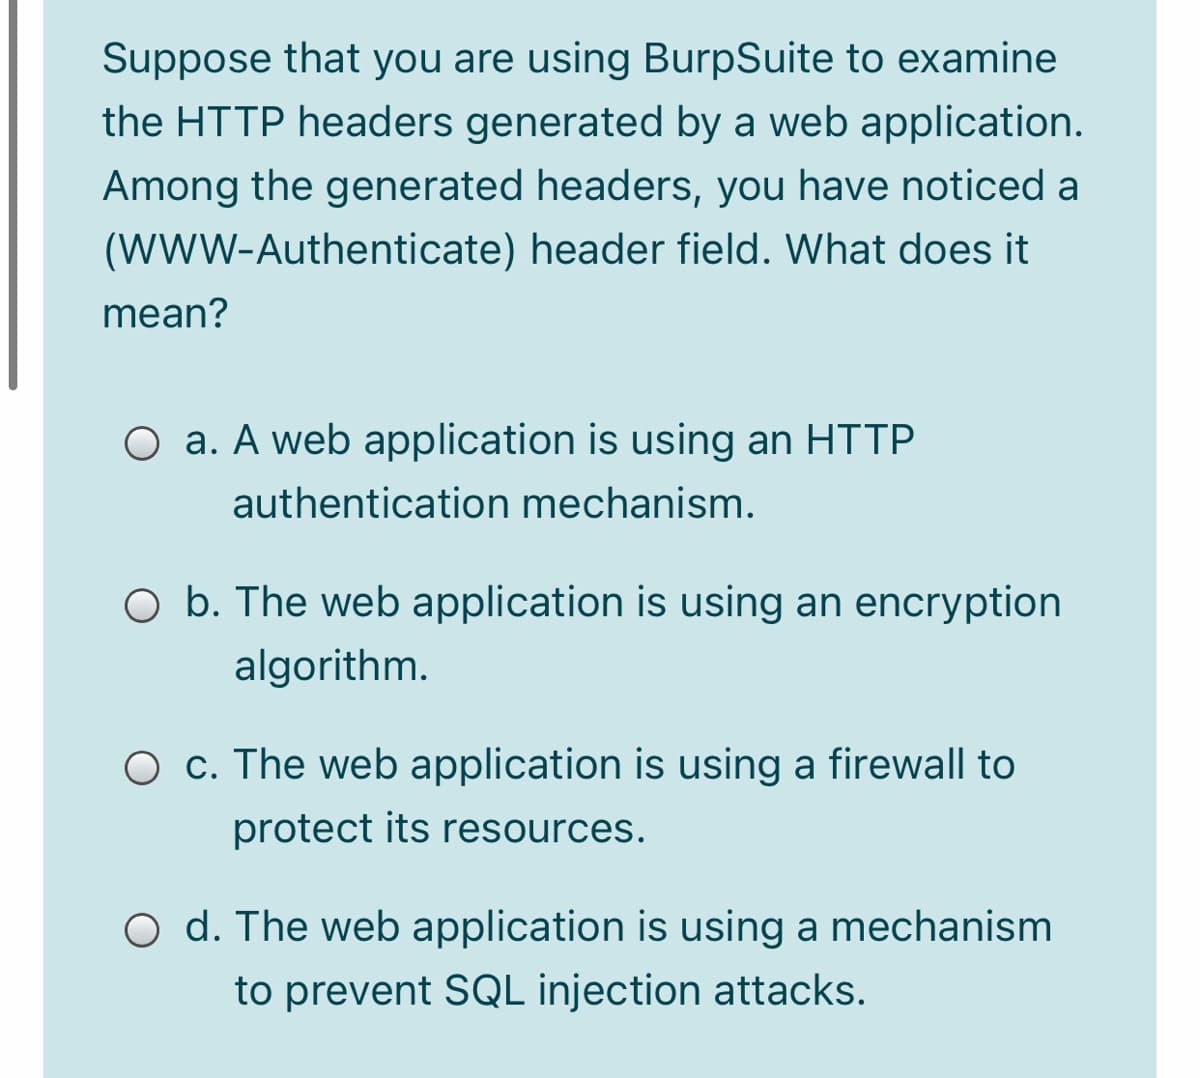 Suppose that you are using BurpSuite to examine
the HTTP headers generated by a web application.
Among the generated headers, you have noticed a
(WWW-Authenticate) header field. What does it
mean?
O a. A web application is using an HTTP
authentication mechanism.
O b. The web application is using an encryption
algorithm.
O c. The web application is using a firewall to
protect its resources.
O d. The web application is using a mechanism
to prevent SQL injection attacks.
